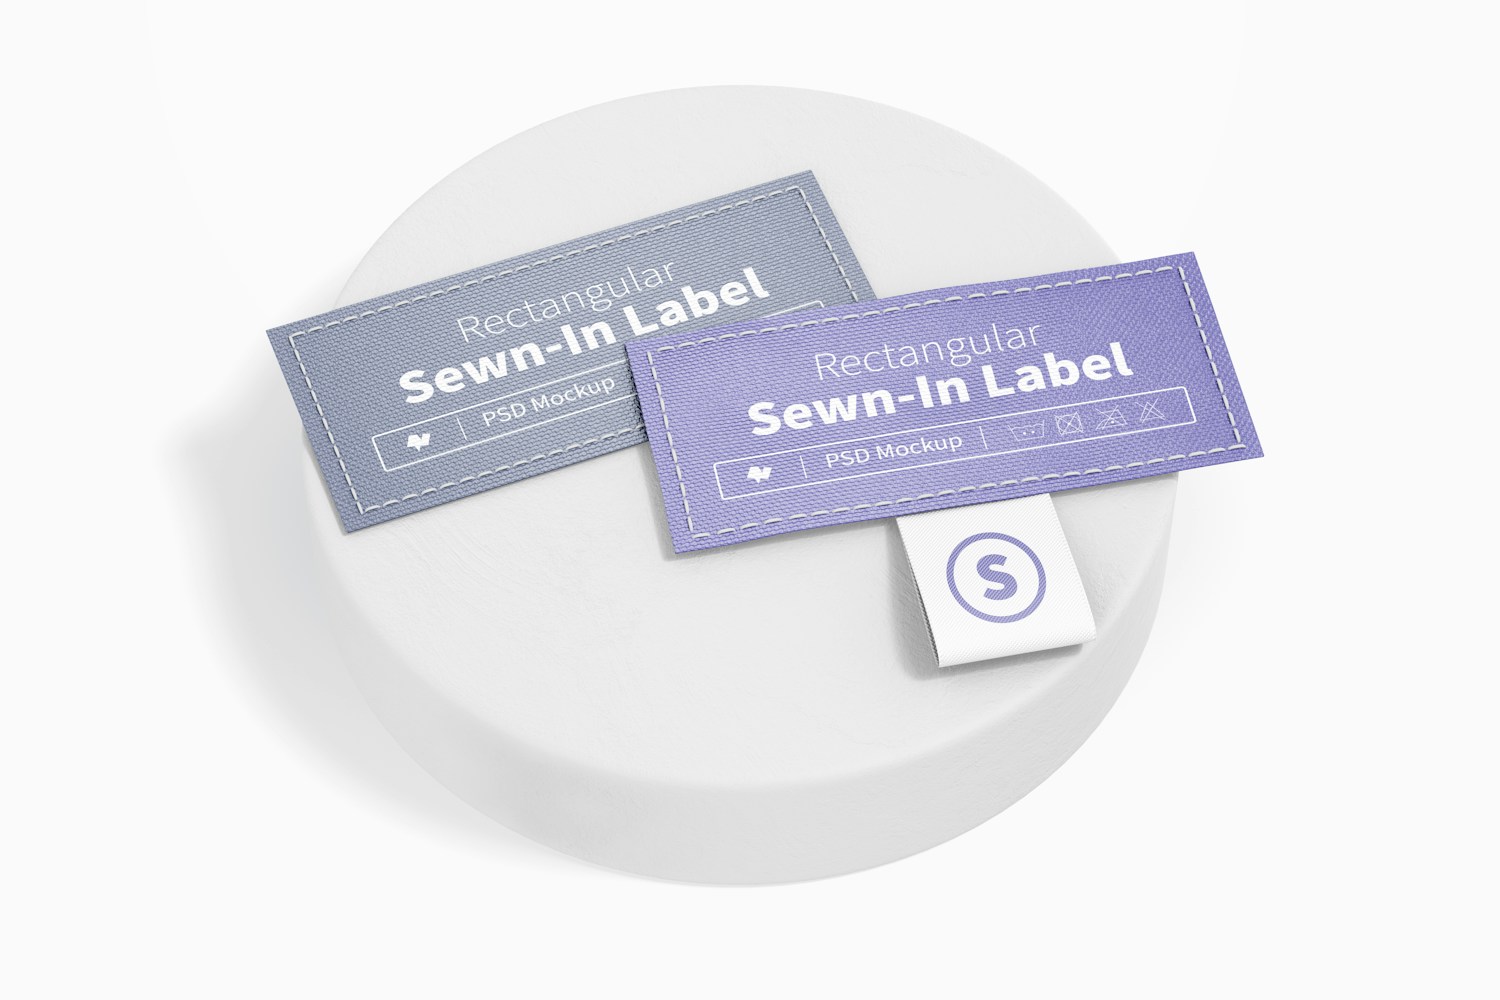 Rectangular Sewn-In Labels on Surface Mockup